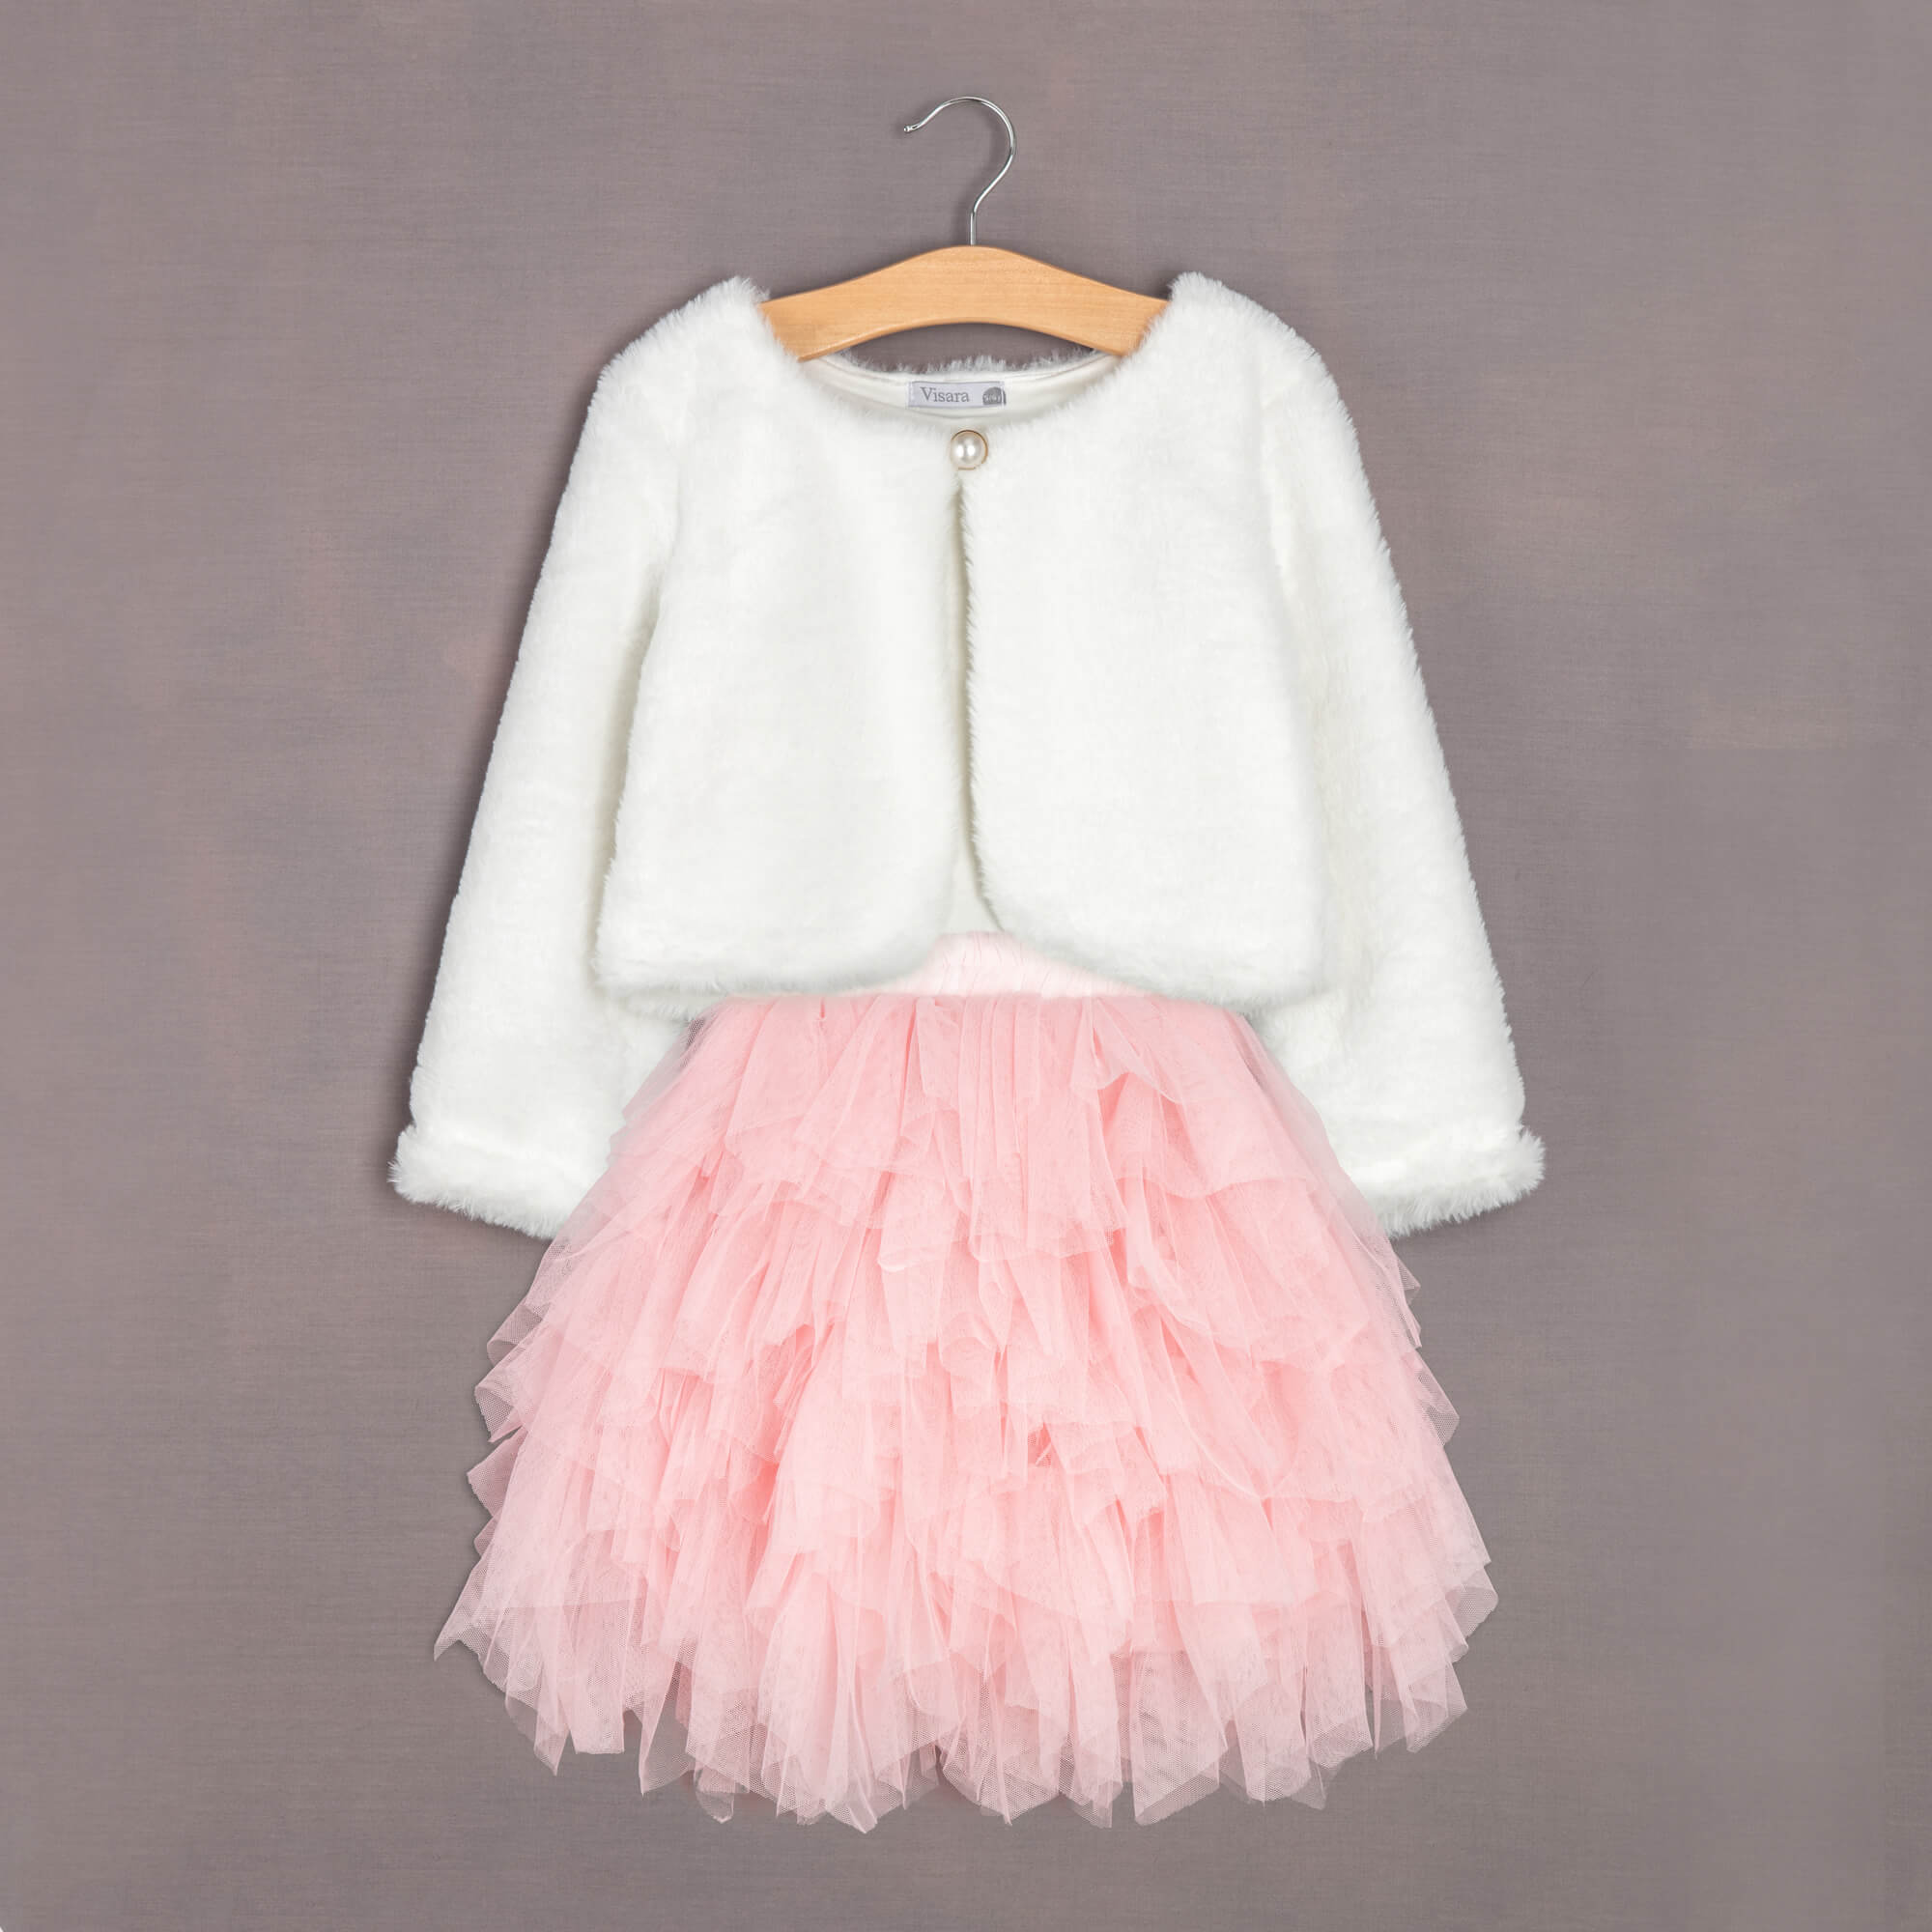 skirt worn with our faux fur bolero on hanger 